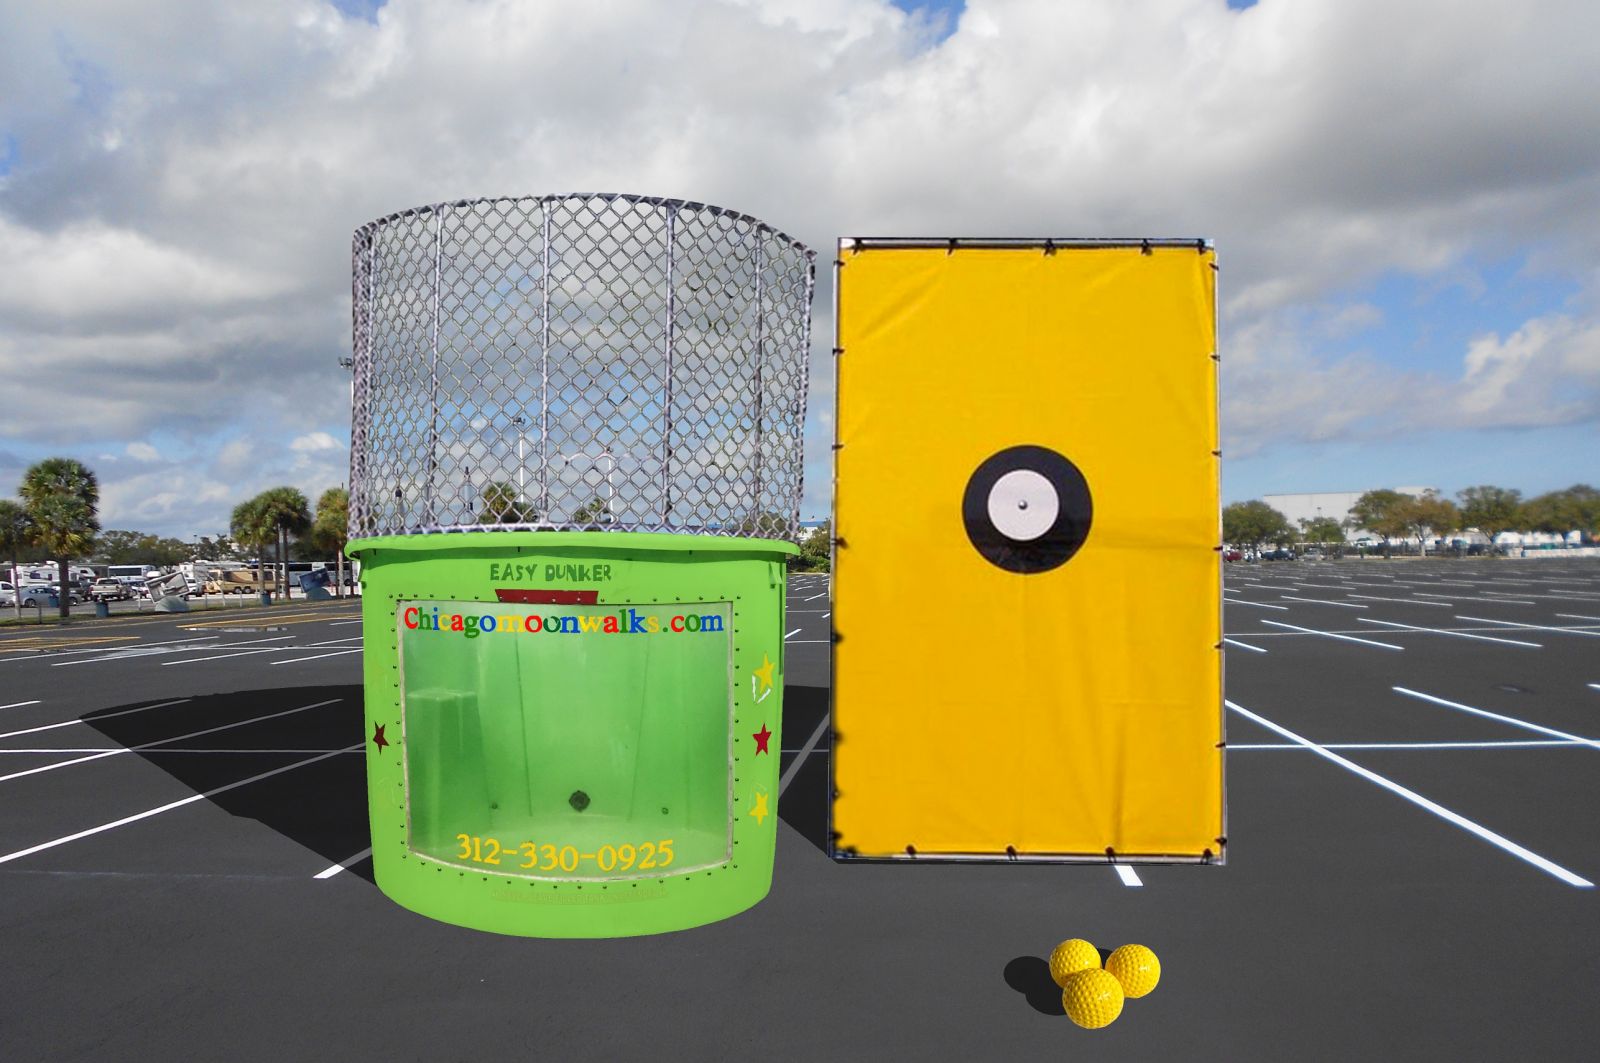 Chicago Dunk Tank Rental, Dunk Tanks for Rent in Chicago IL